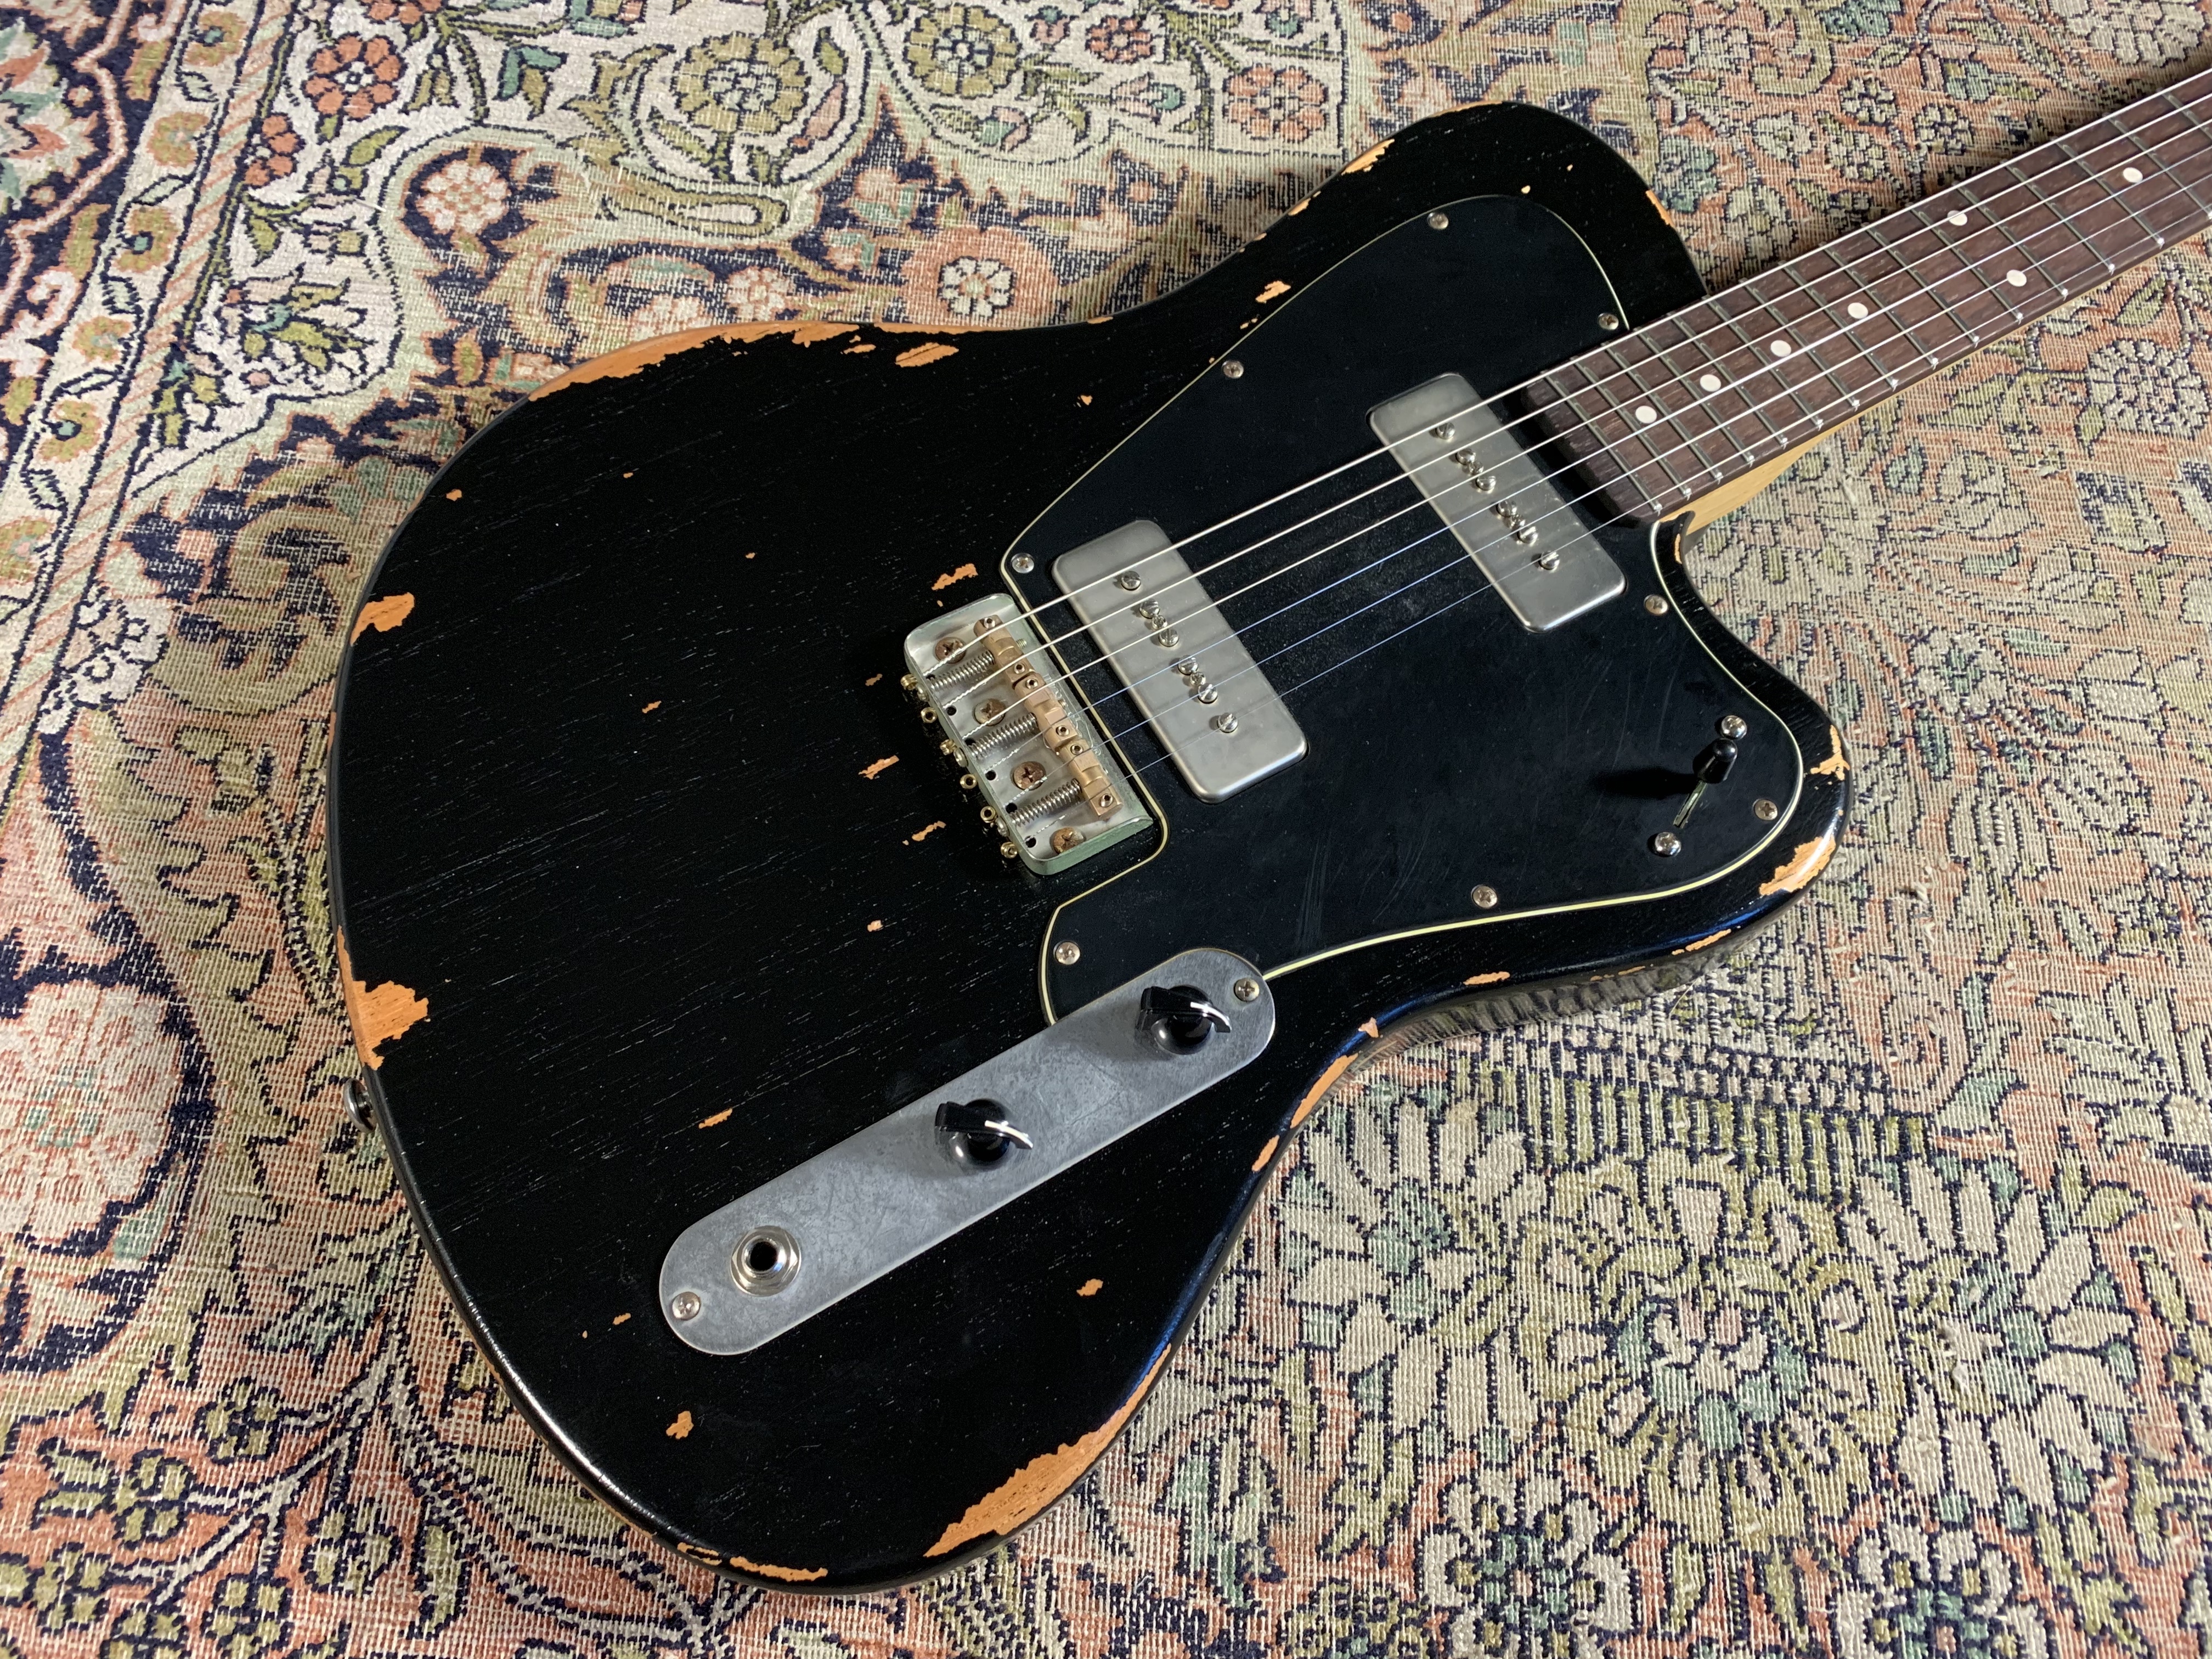 Guitar Review - California model from luthier Tony Girault